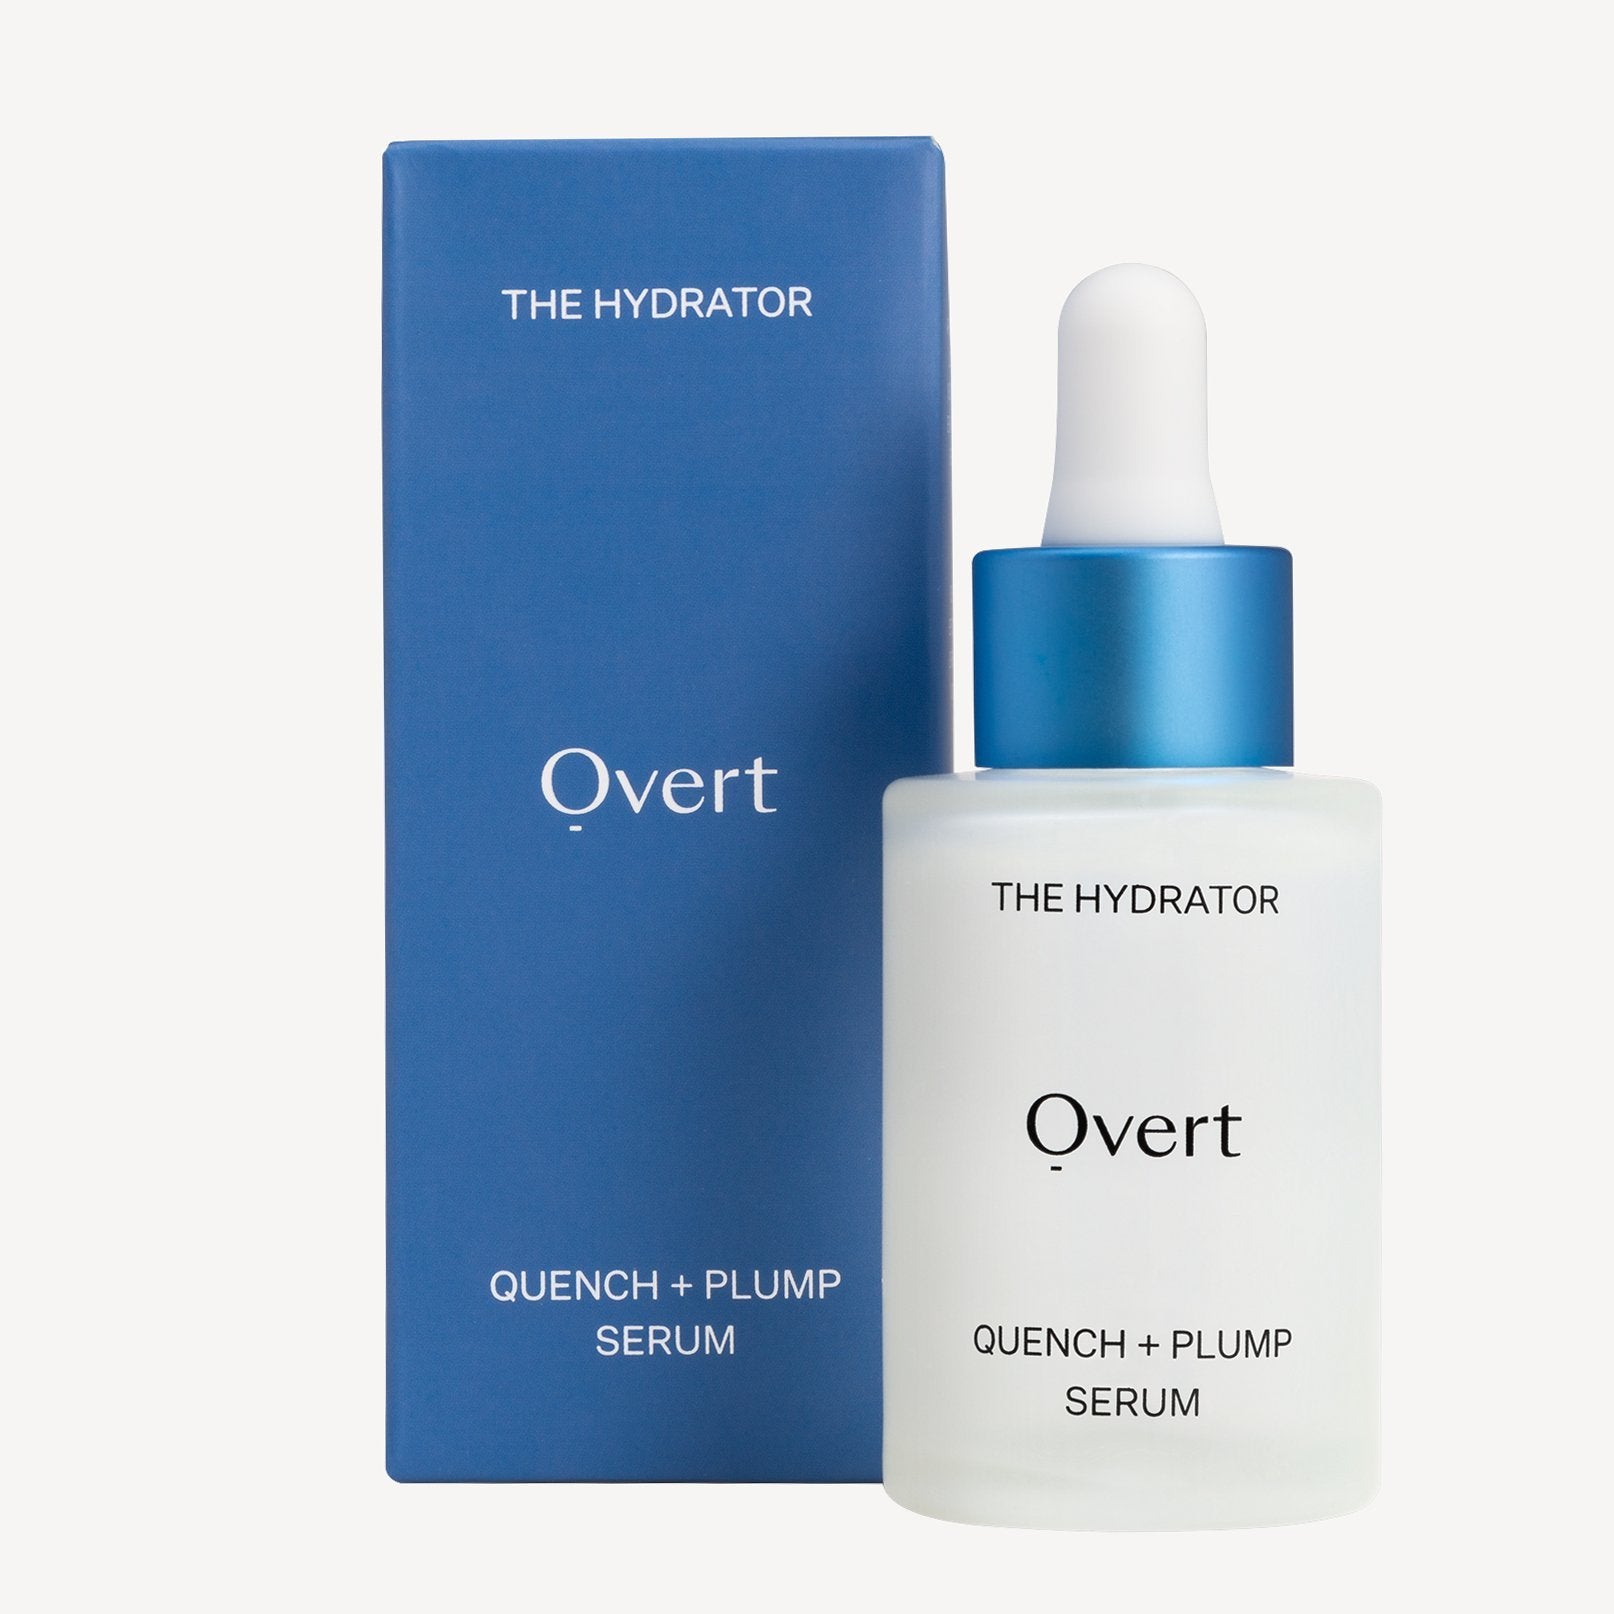 The Hydrator by Overt